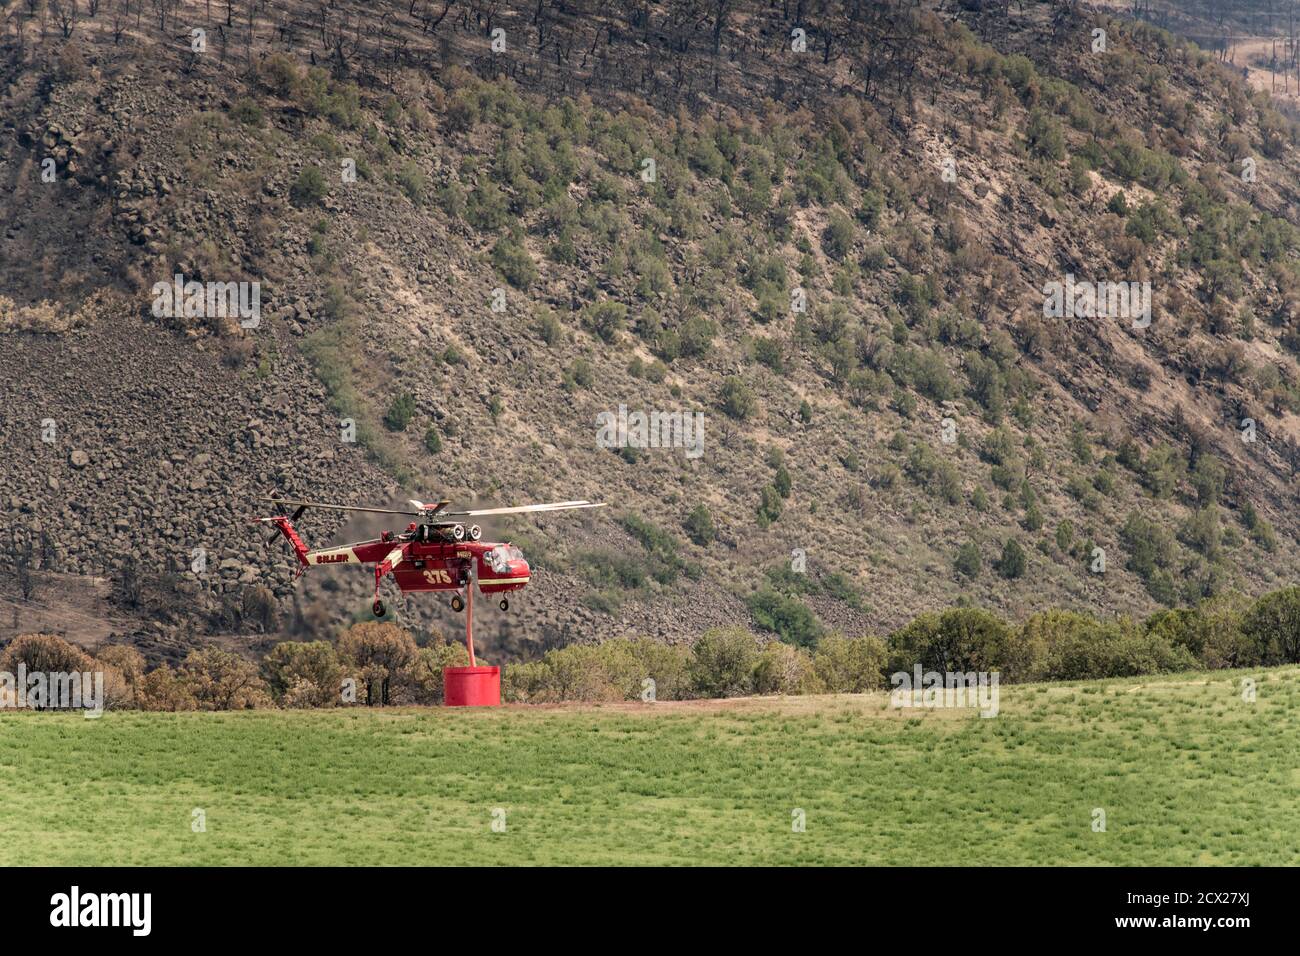 Military helicopter with fire retardant against mountain Stock Photo